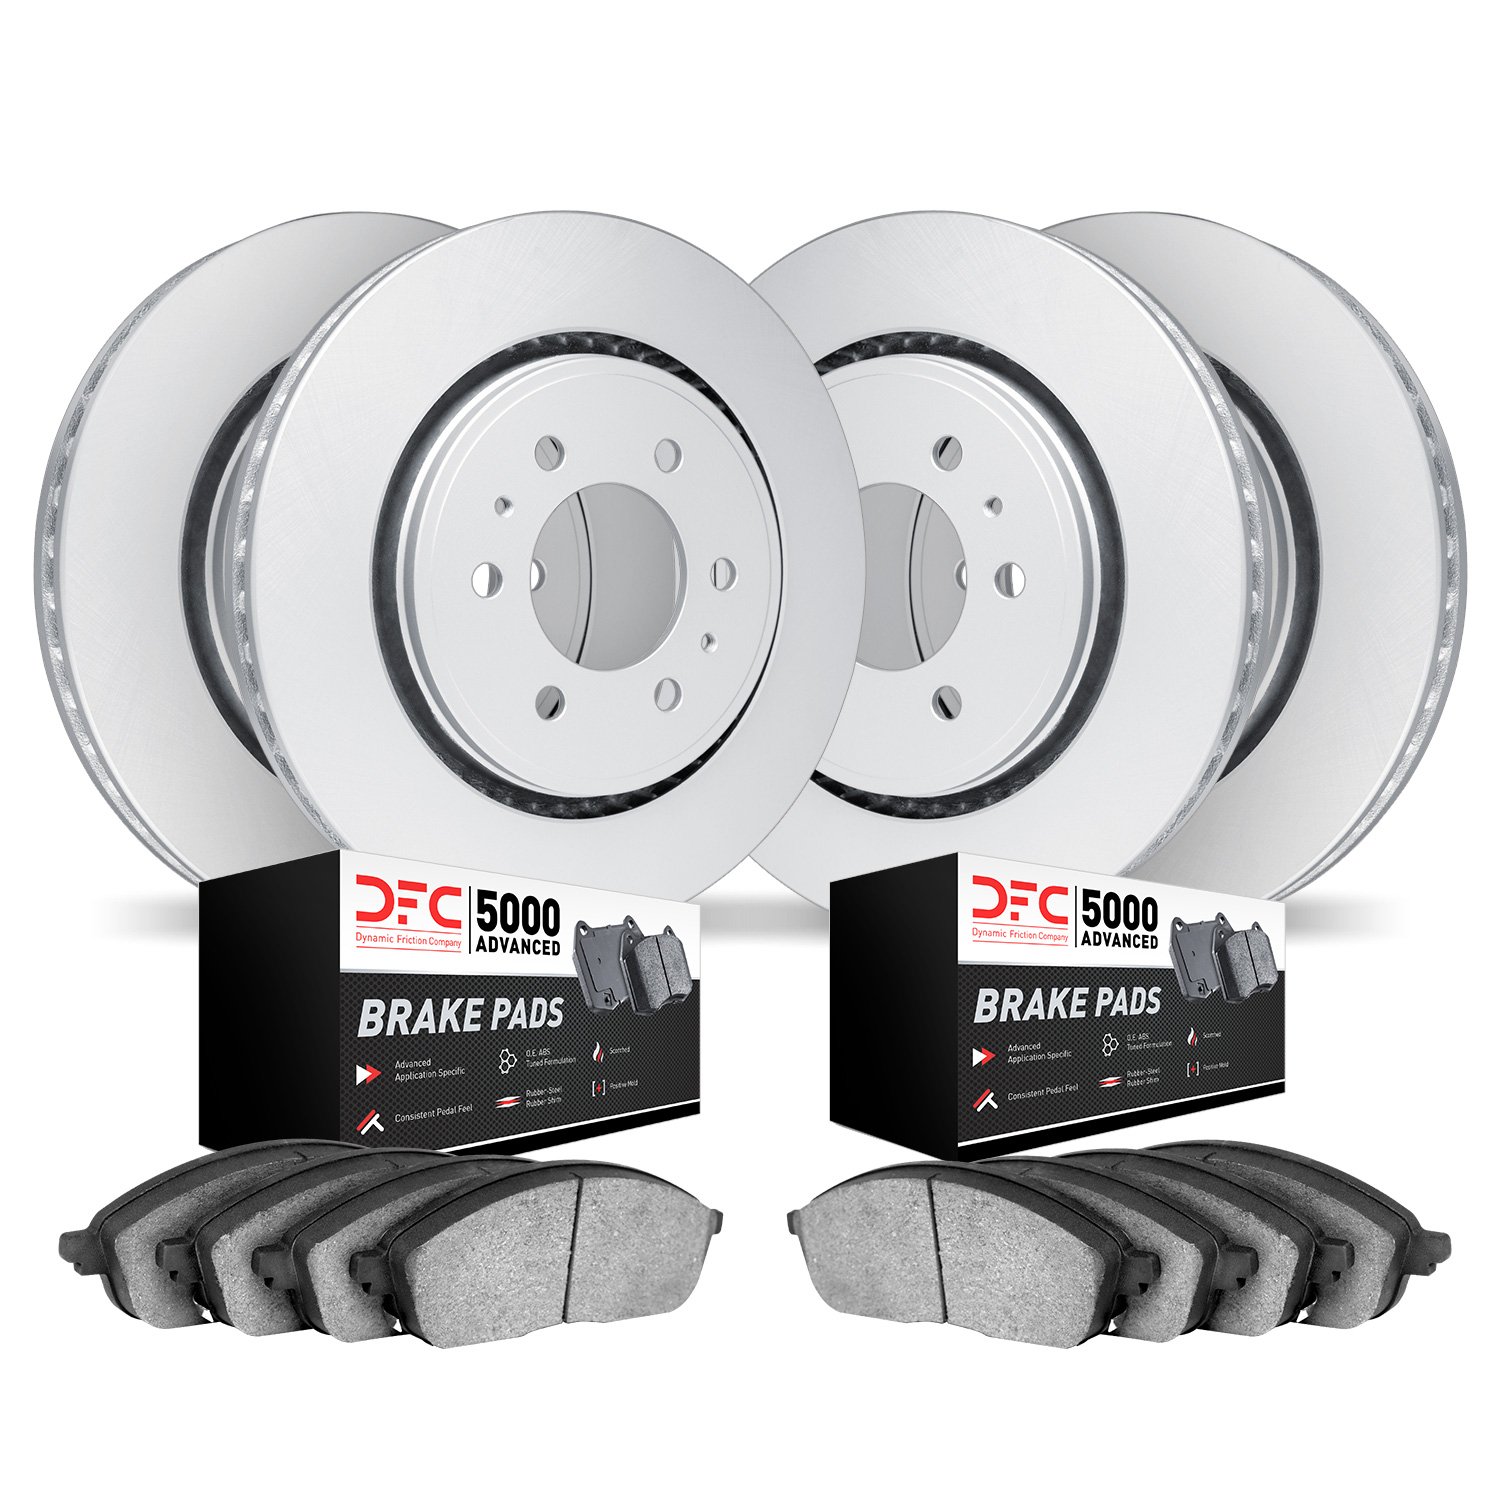 4504-47168 Geospec Brake Rotors w/5000 Advanced Brake Pads Kit, Fits Select GM, Position: Front and Rear